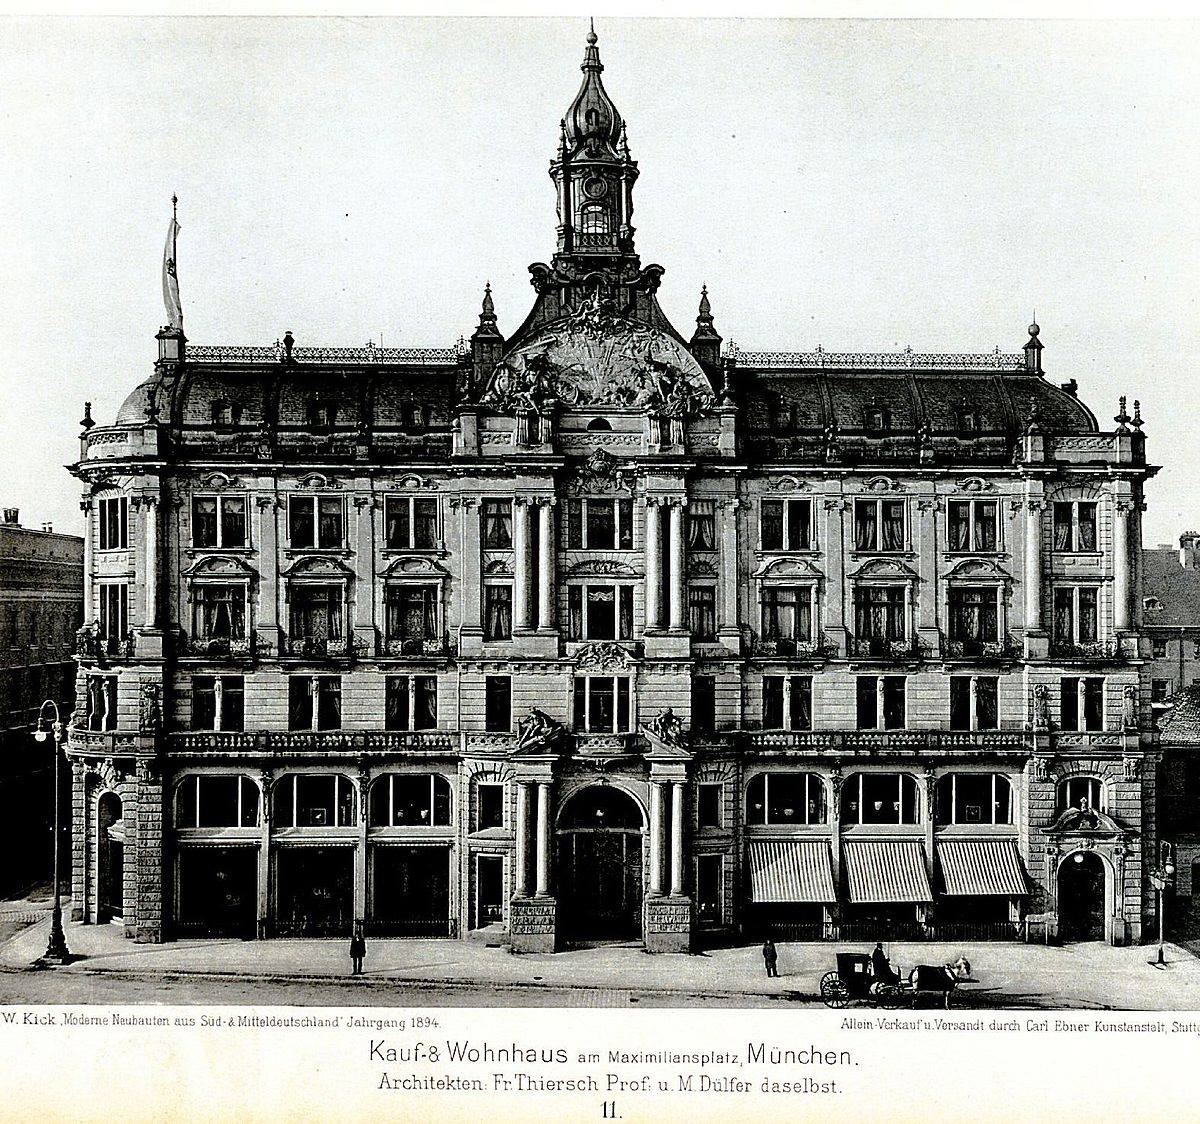  Bernheimer-Haus, which was opened in December 1889 by Prince Regent Luitpold